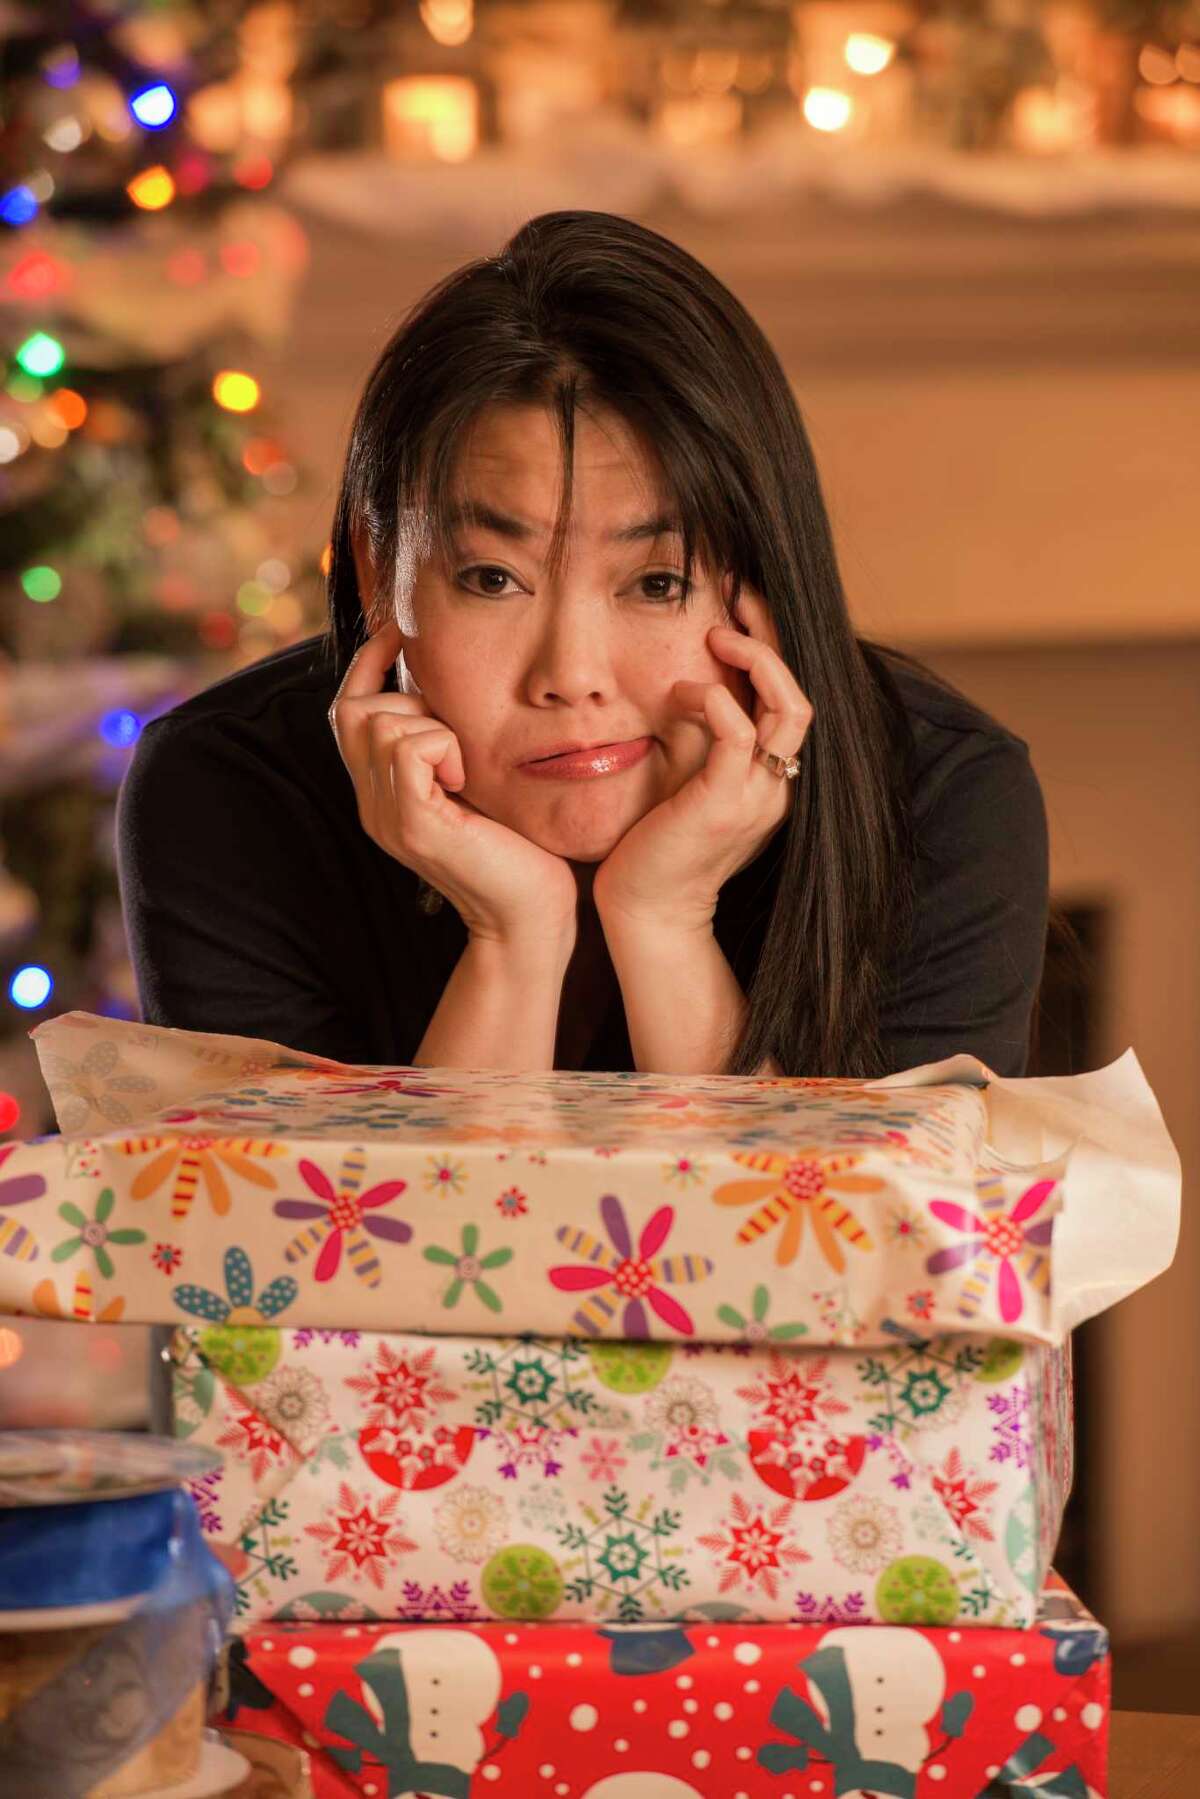 Frazzled woman with Christmas gifts.